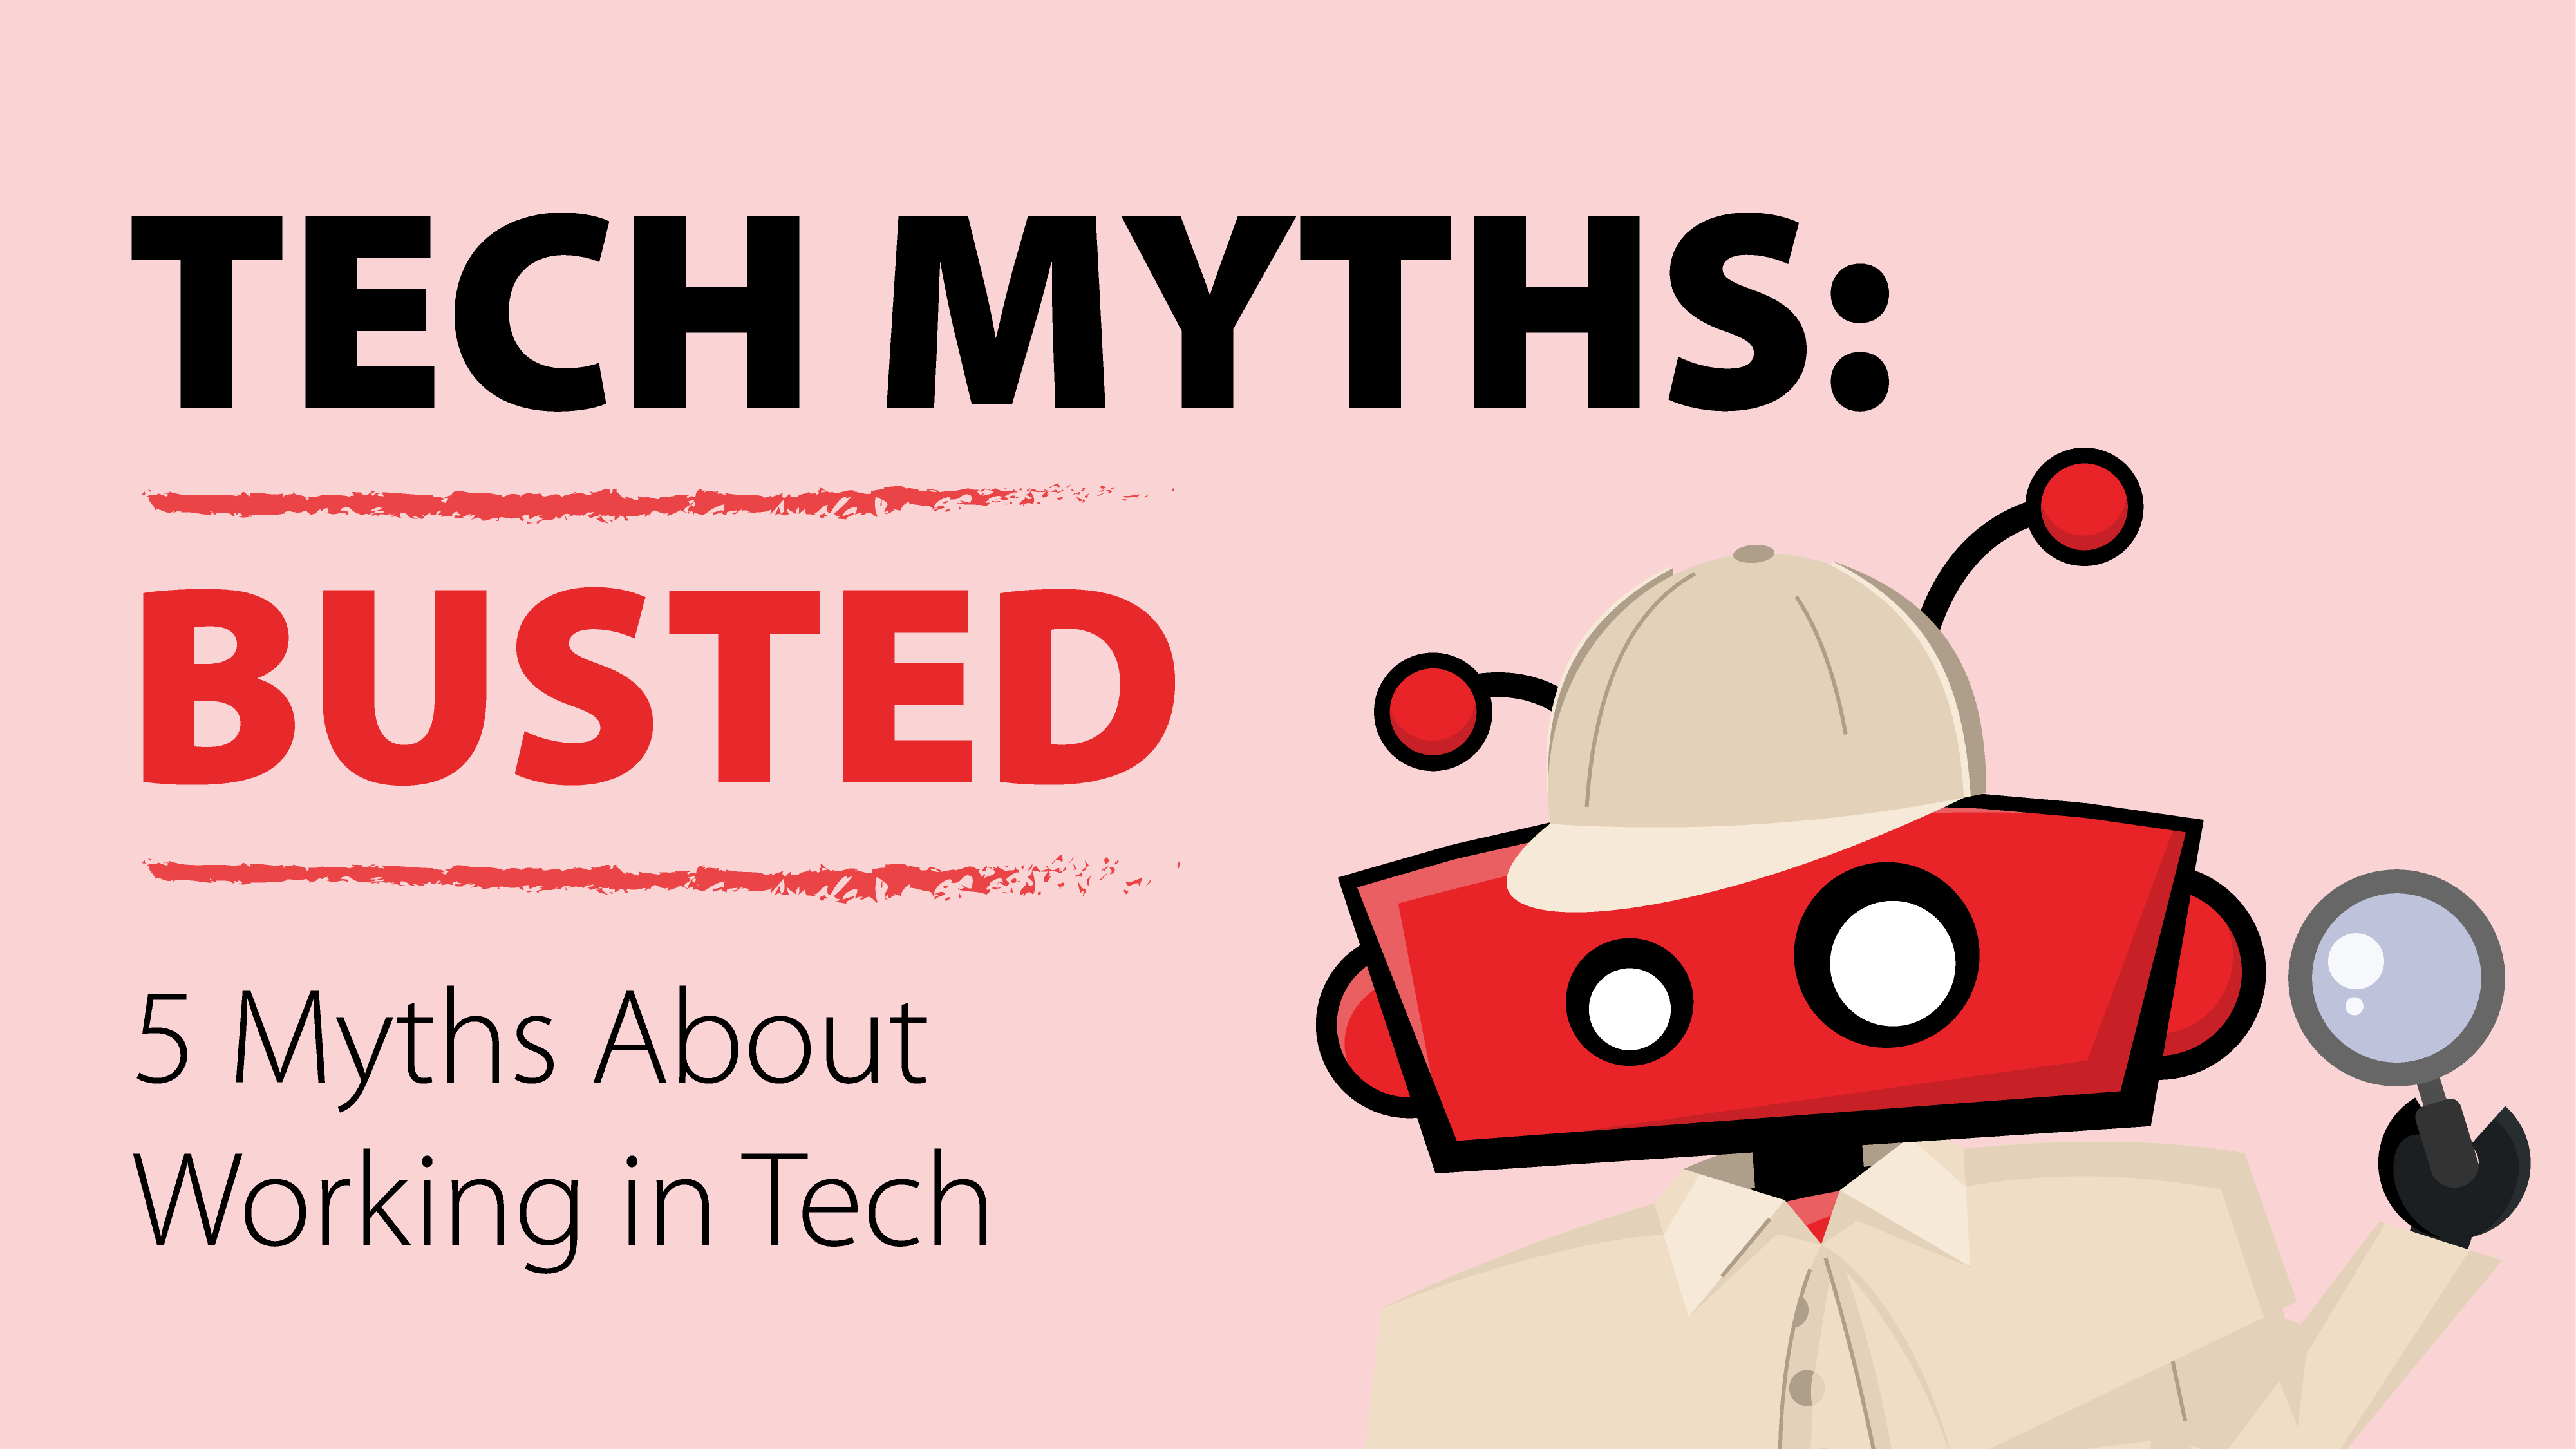 5 Myths About Working in Tech